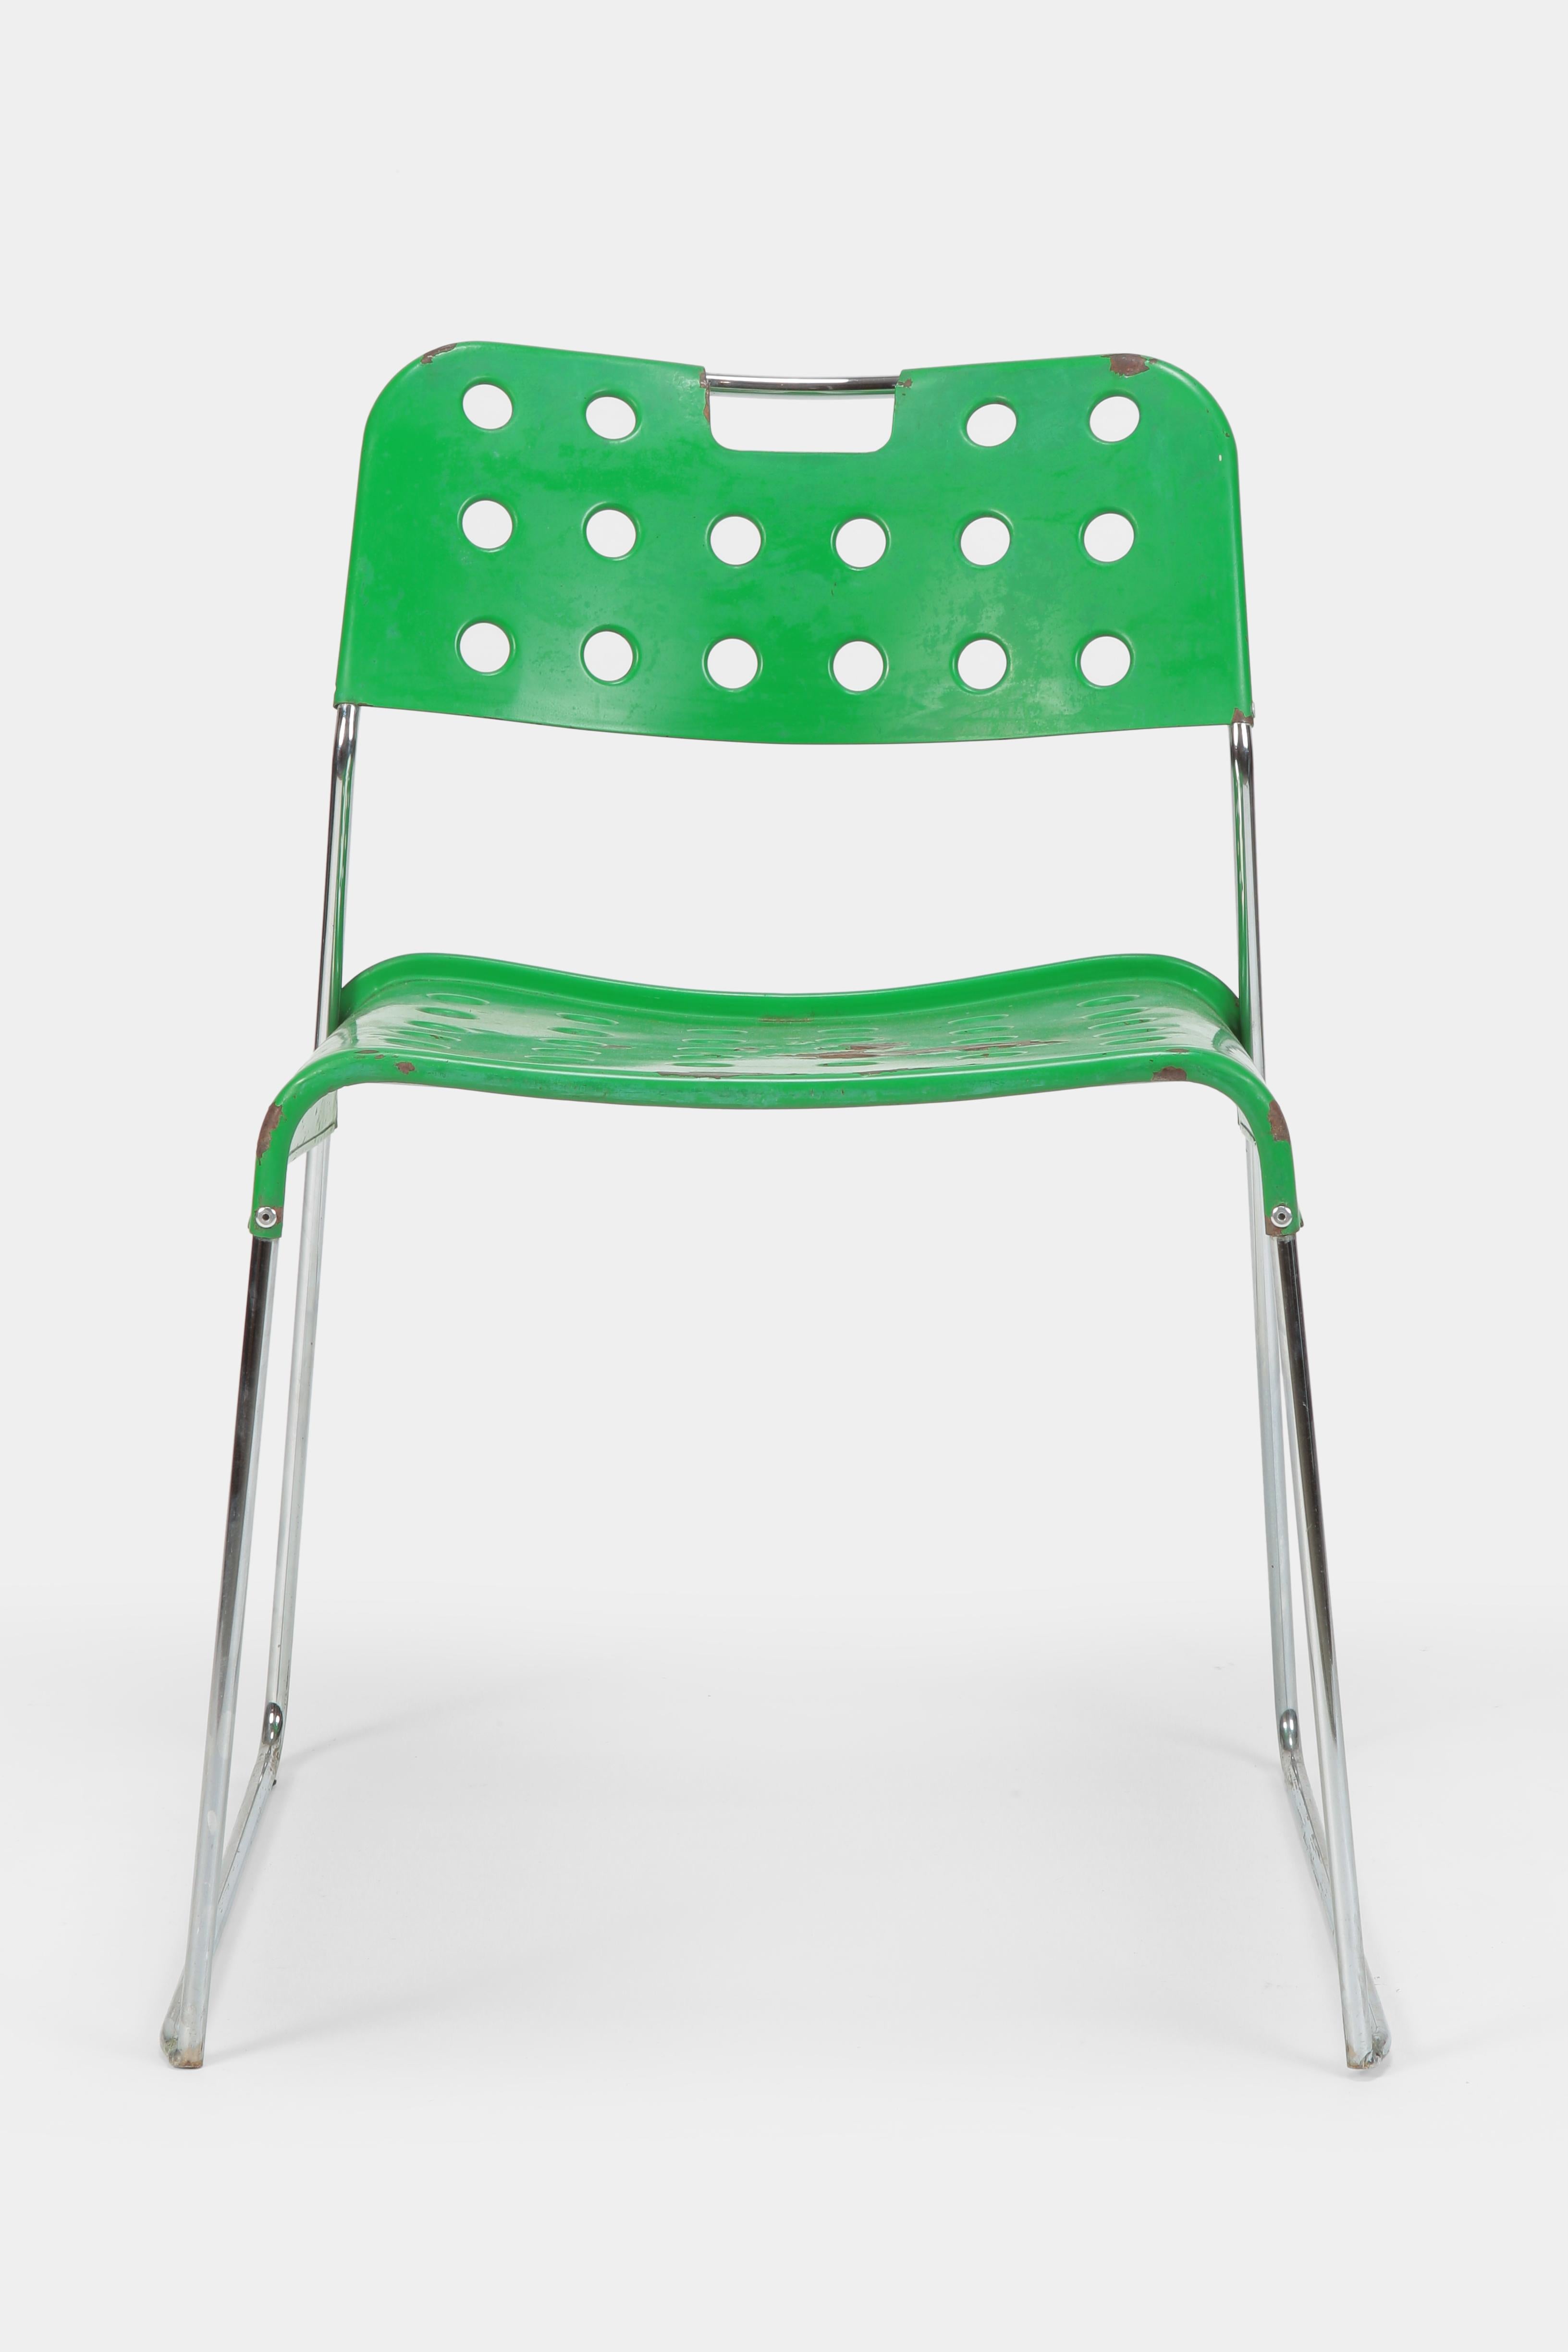 Rodney Kinsman “Omstak” chair manufactured by Bieffeplast in the 1970s in Italy. Seat and back rest made of green lacquered, perforated metal attached to a chrome steel frame. Popular collectible with intense patina.